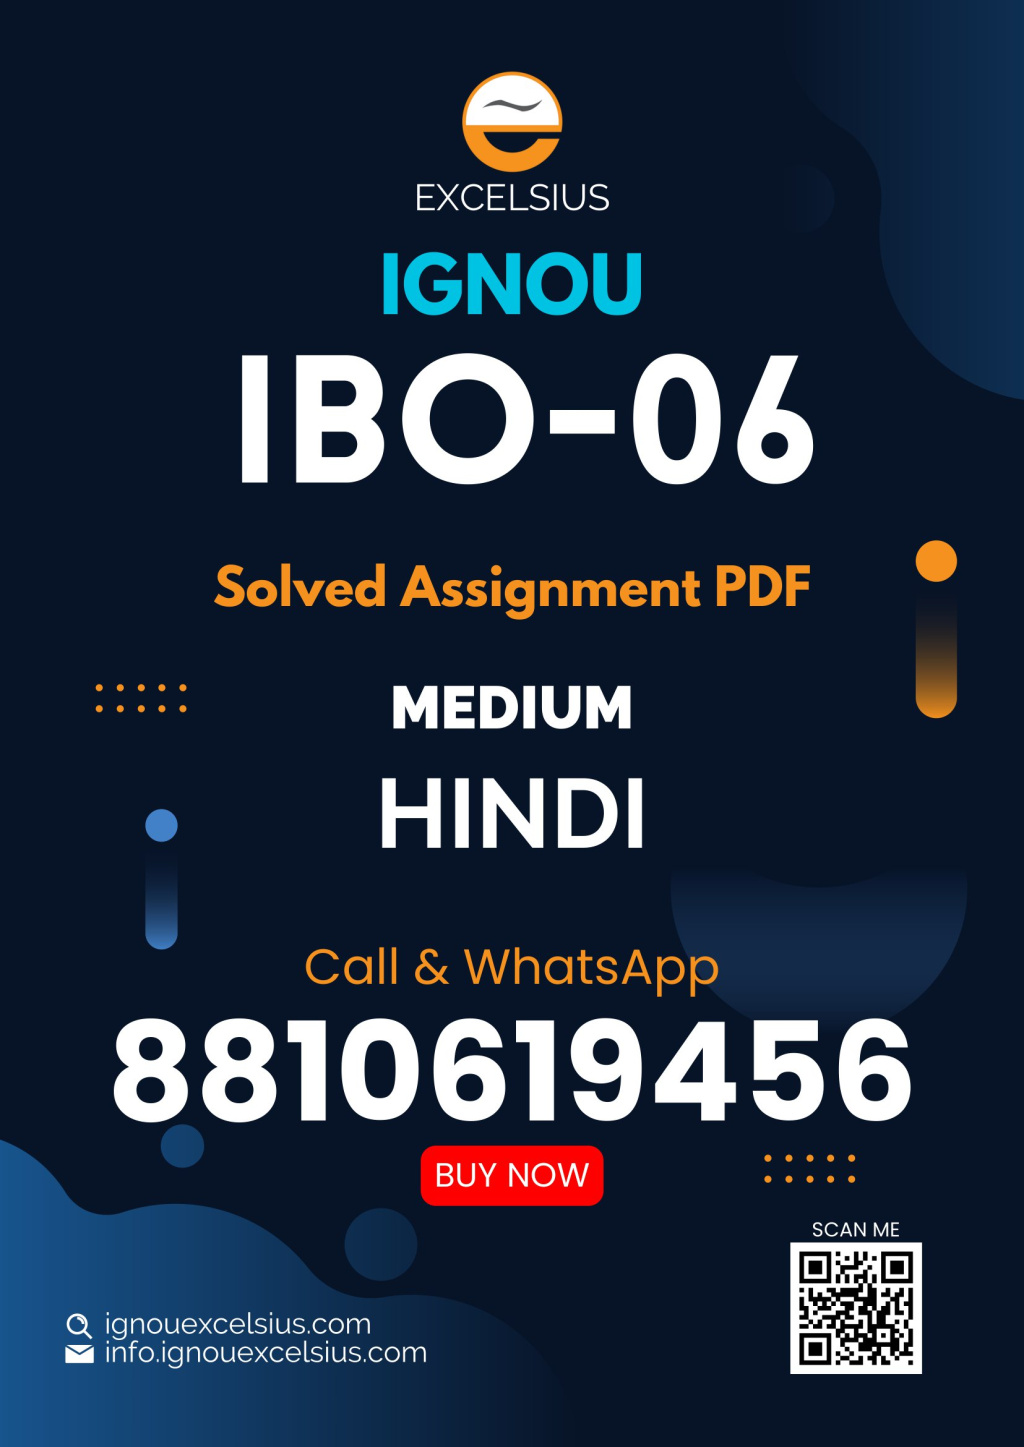 IGNOU IBO-06 - International Business Finance, Latest Solved Assignment-July 2022 – January 2023